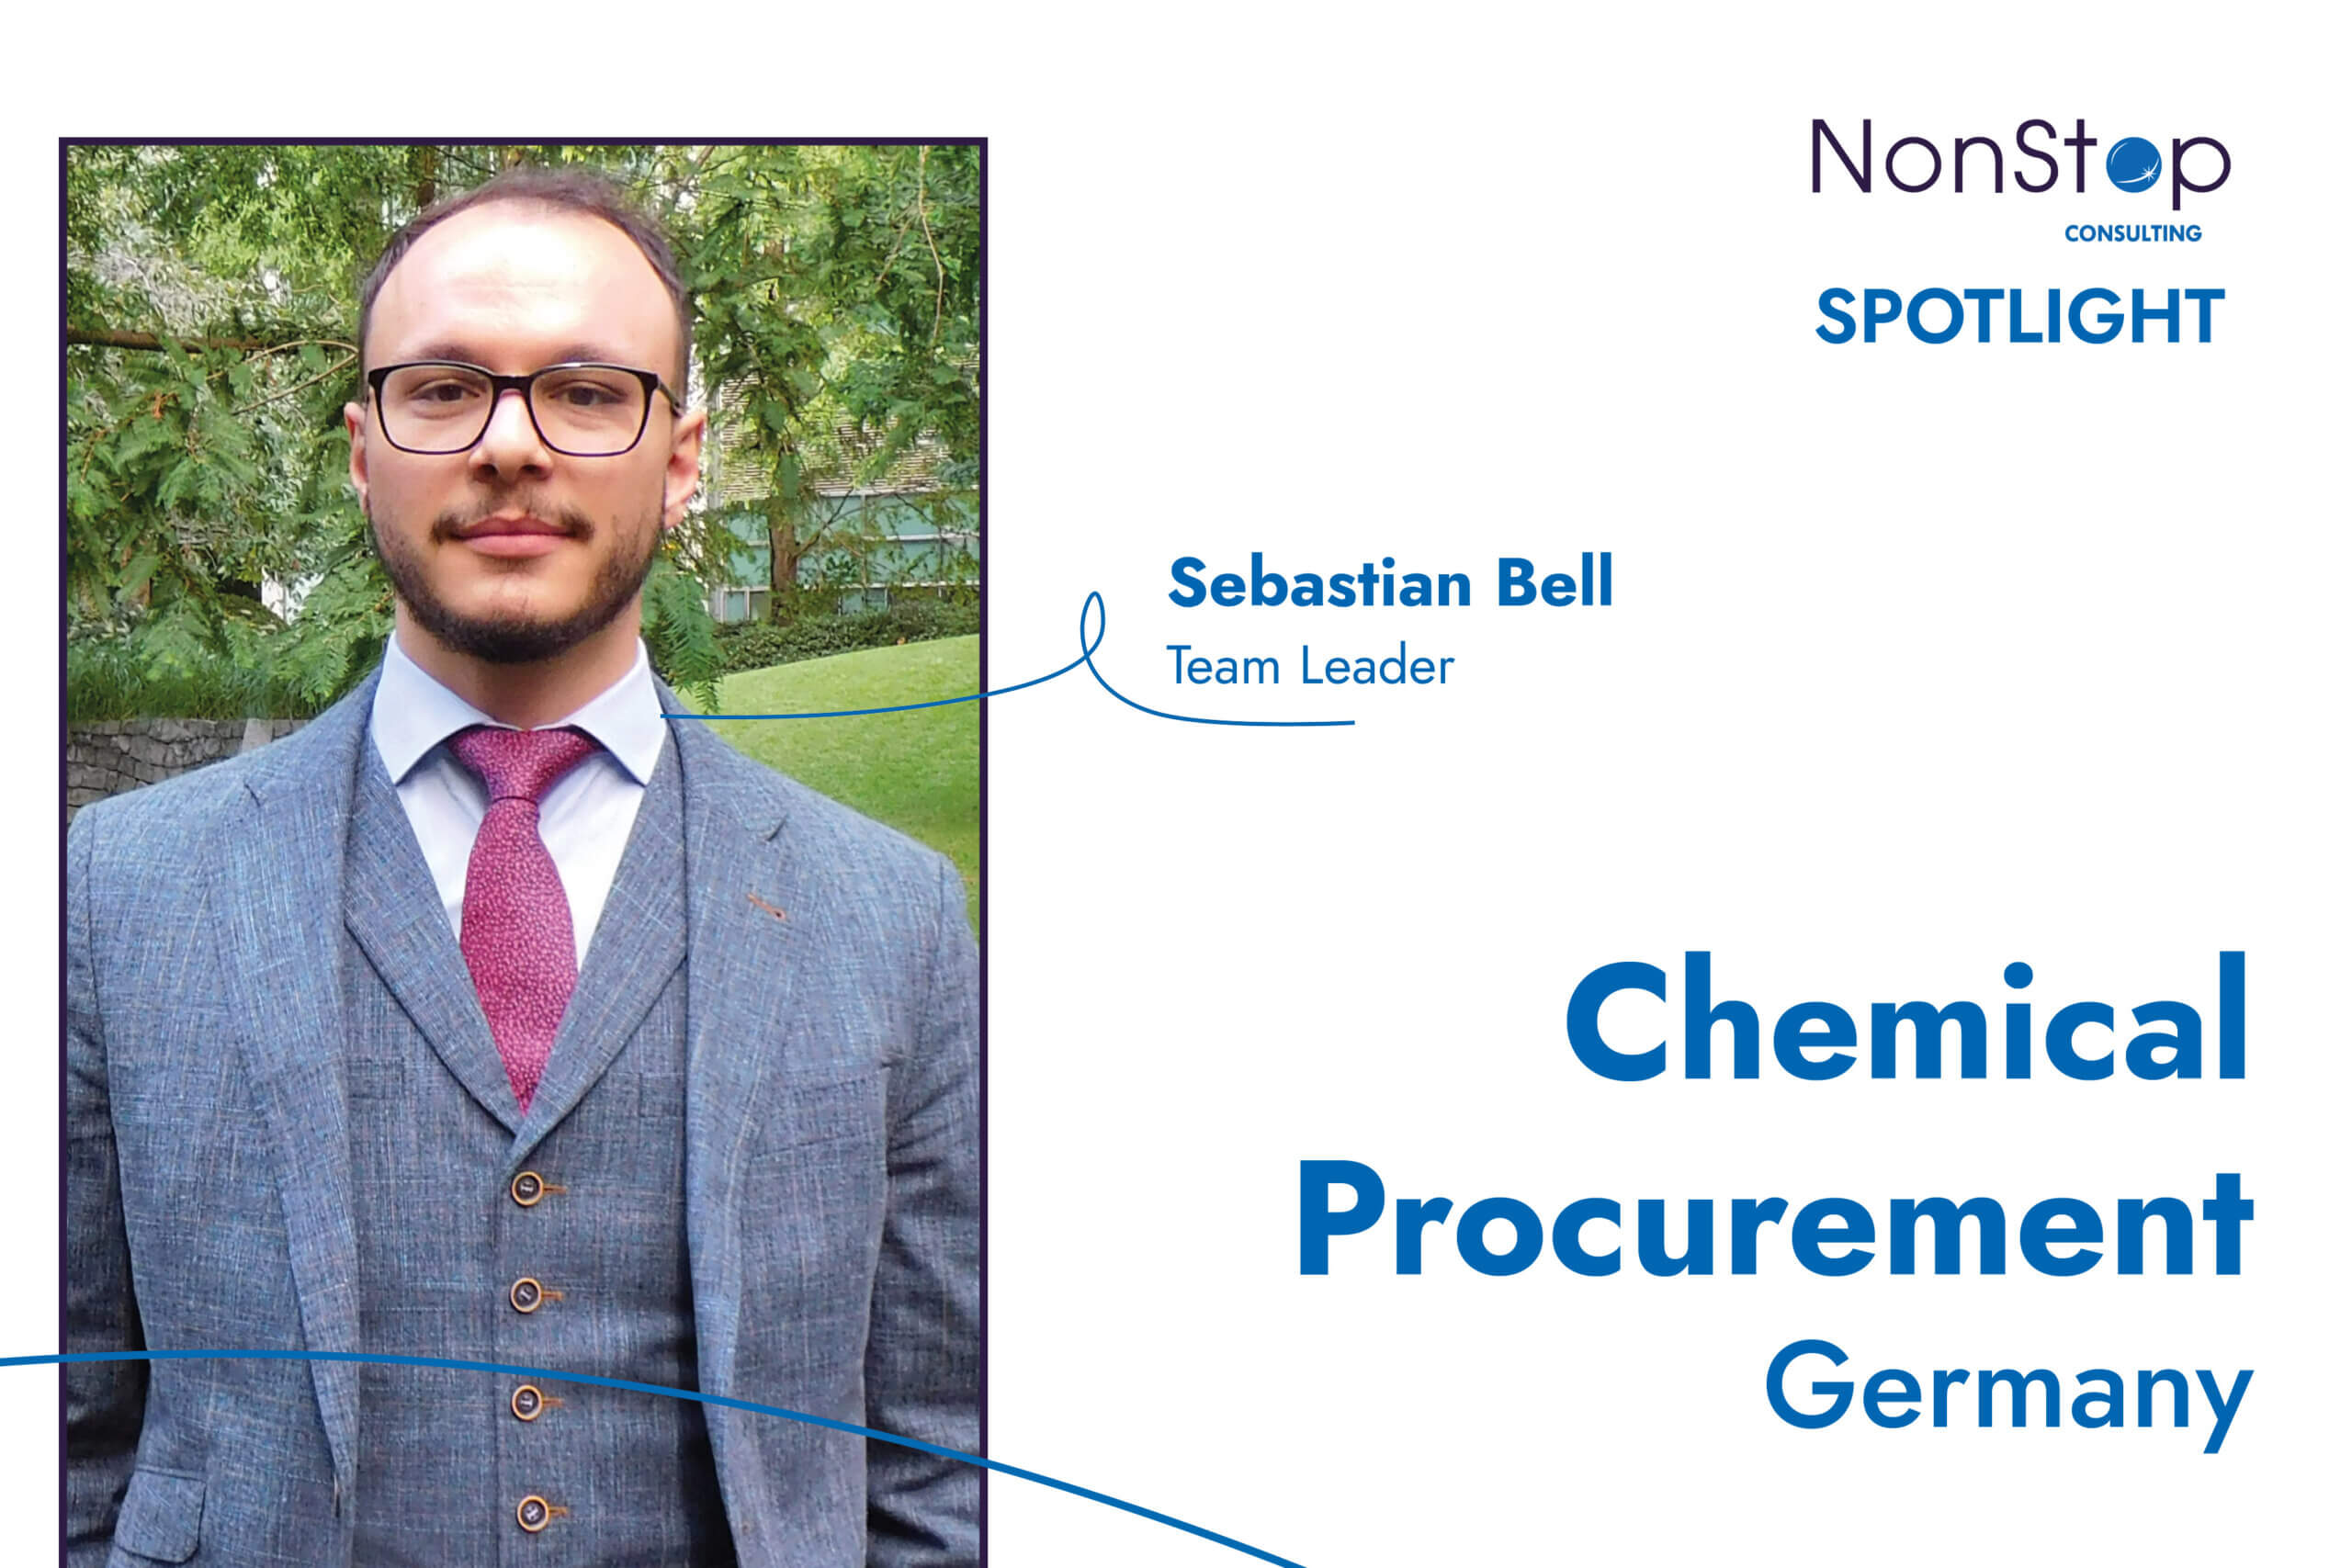 Sebastian Bell, who recruits in the German chemicals sector gives an overview of the industry in this edition of our Spotlight series.